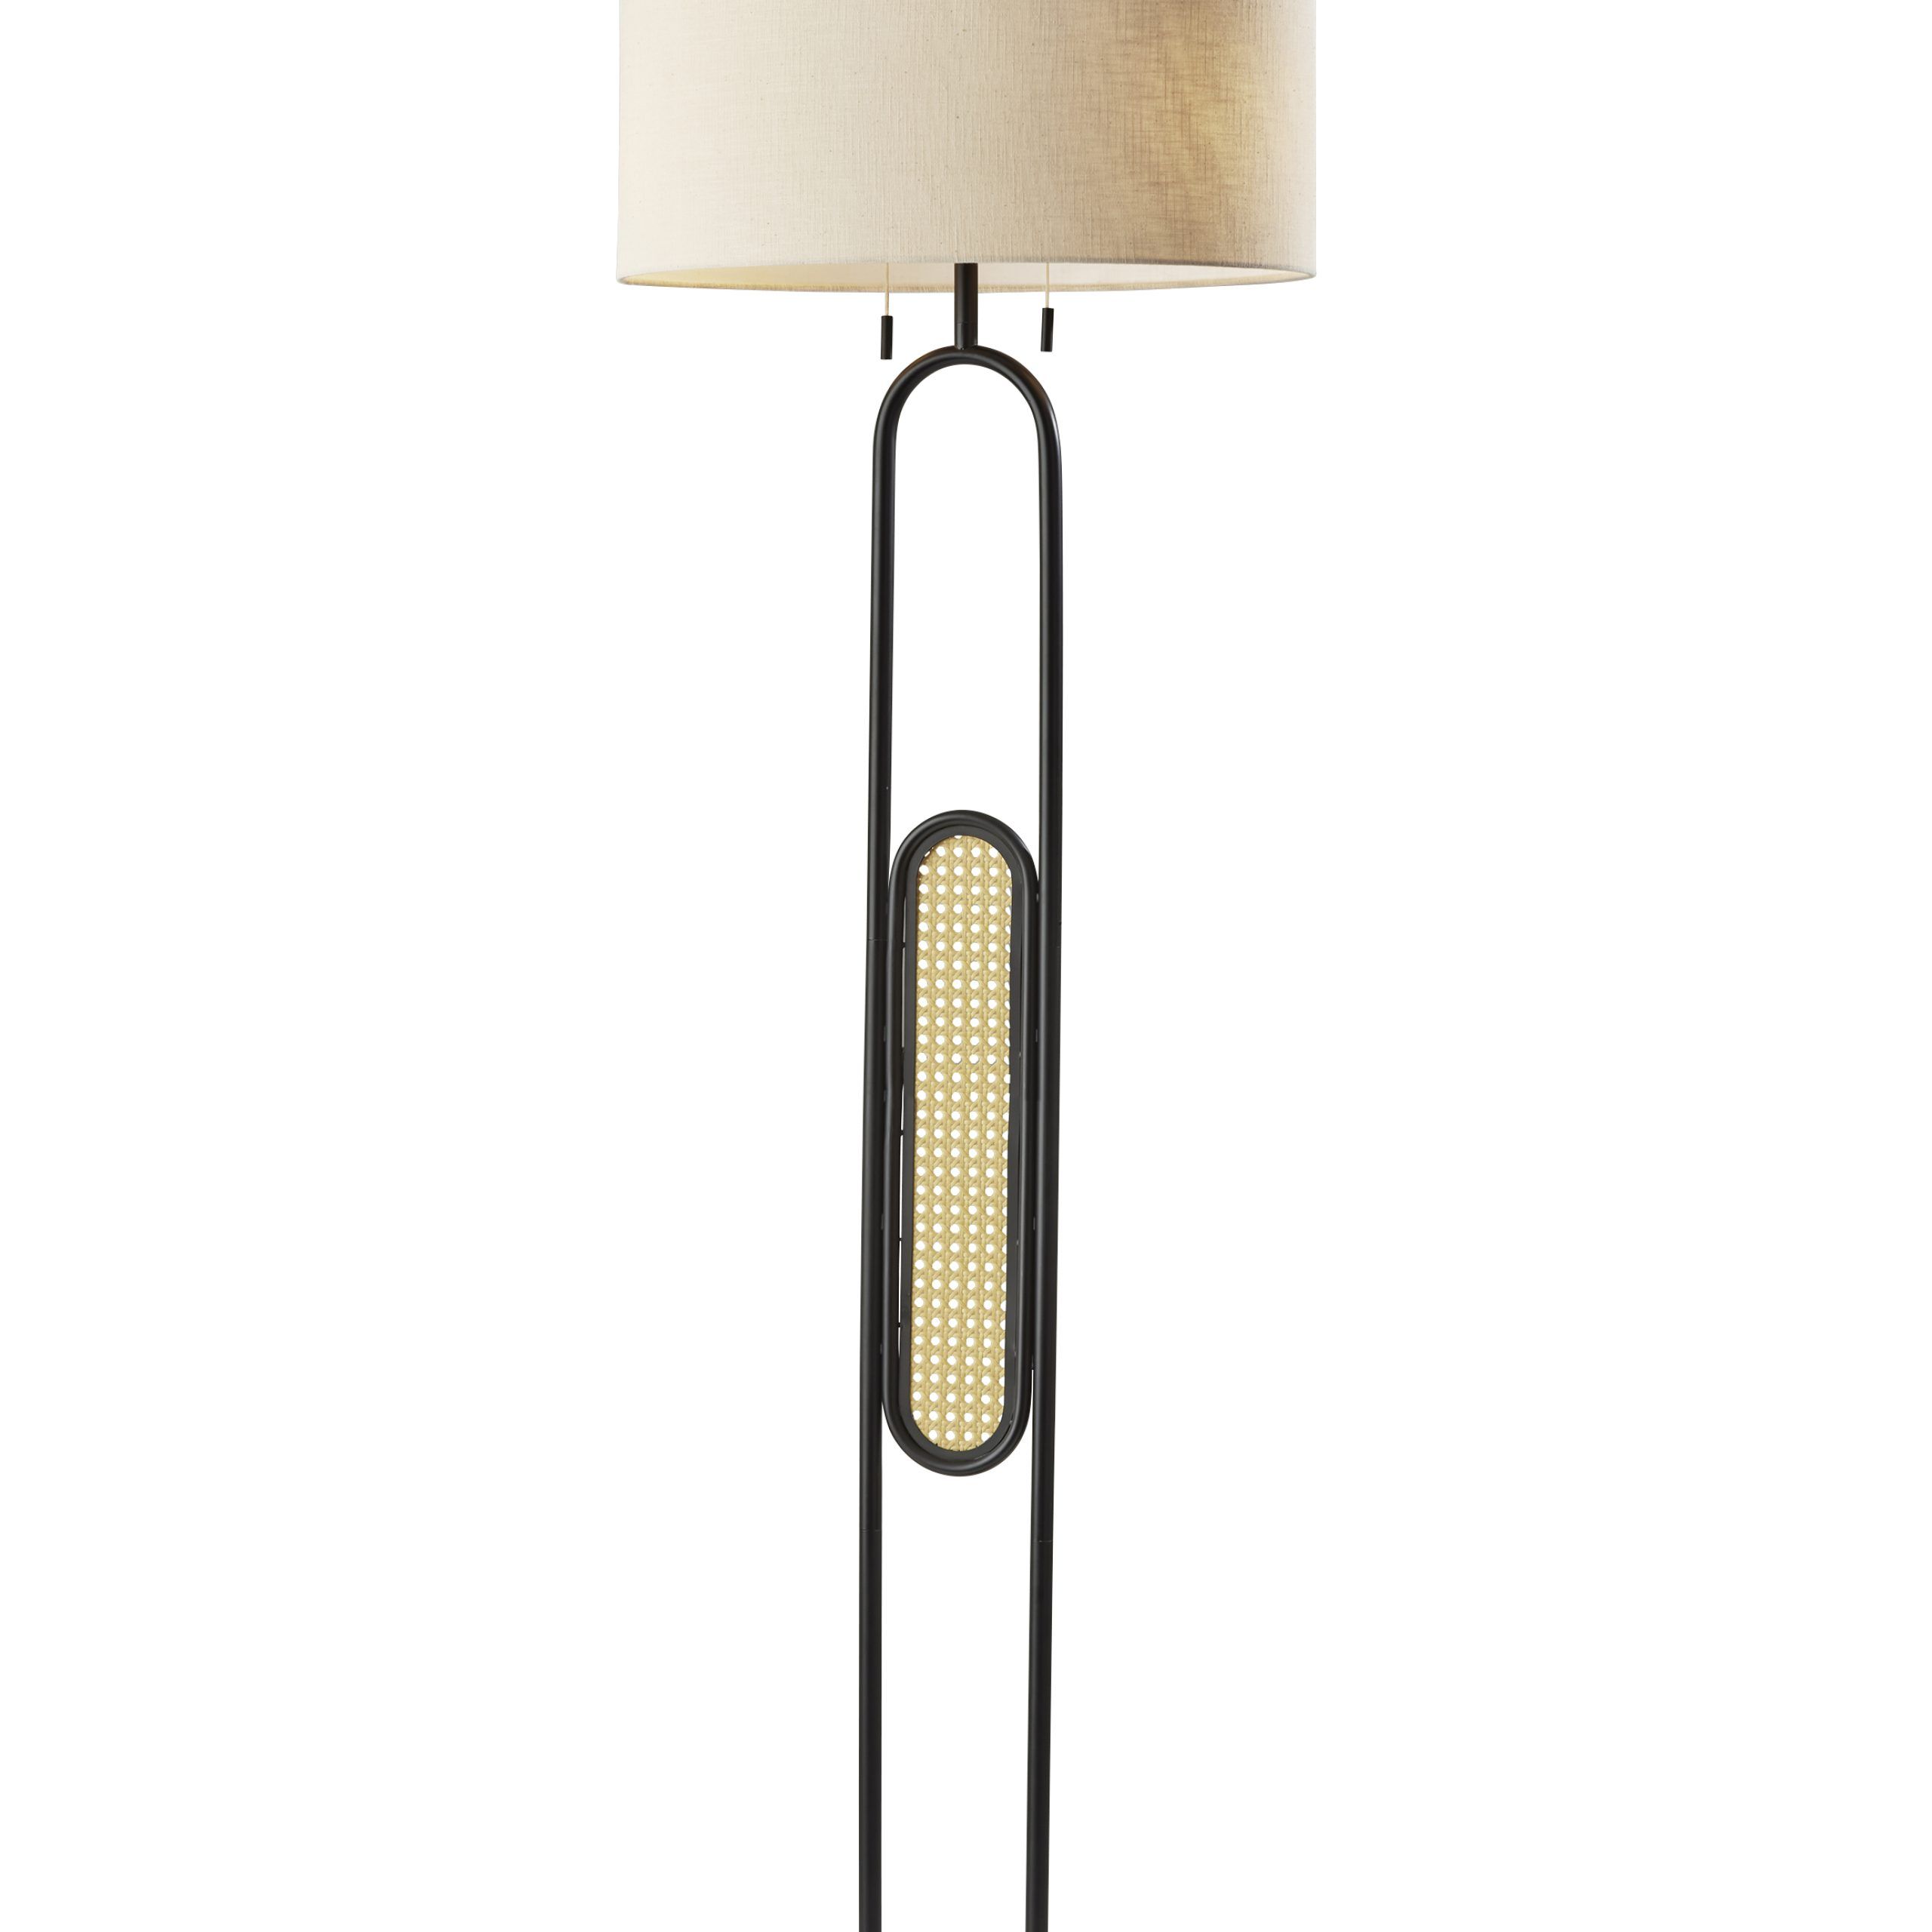 Adesso Levy Floor Lamp, Black With Webbed Caning Material, Cream Textured  Fabric Shade – Walmart Regarding Textured Fabric Floor Lamps (View 9 of 15)